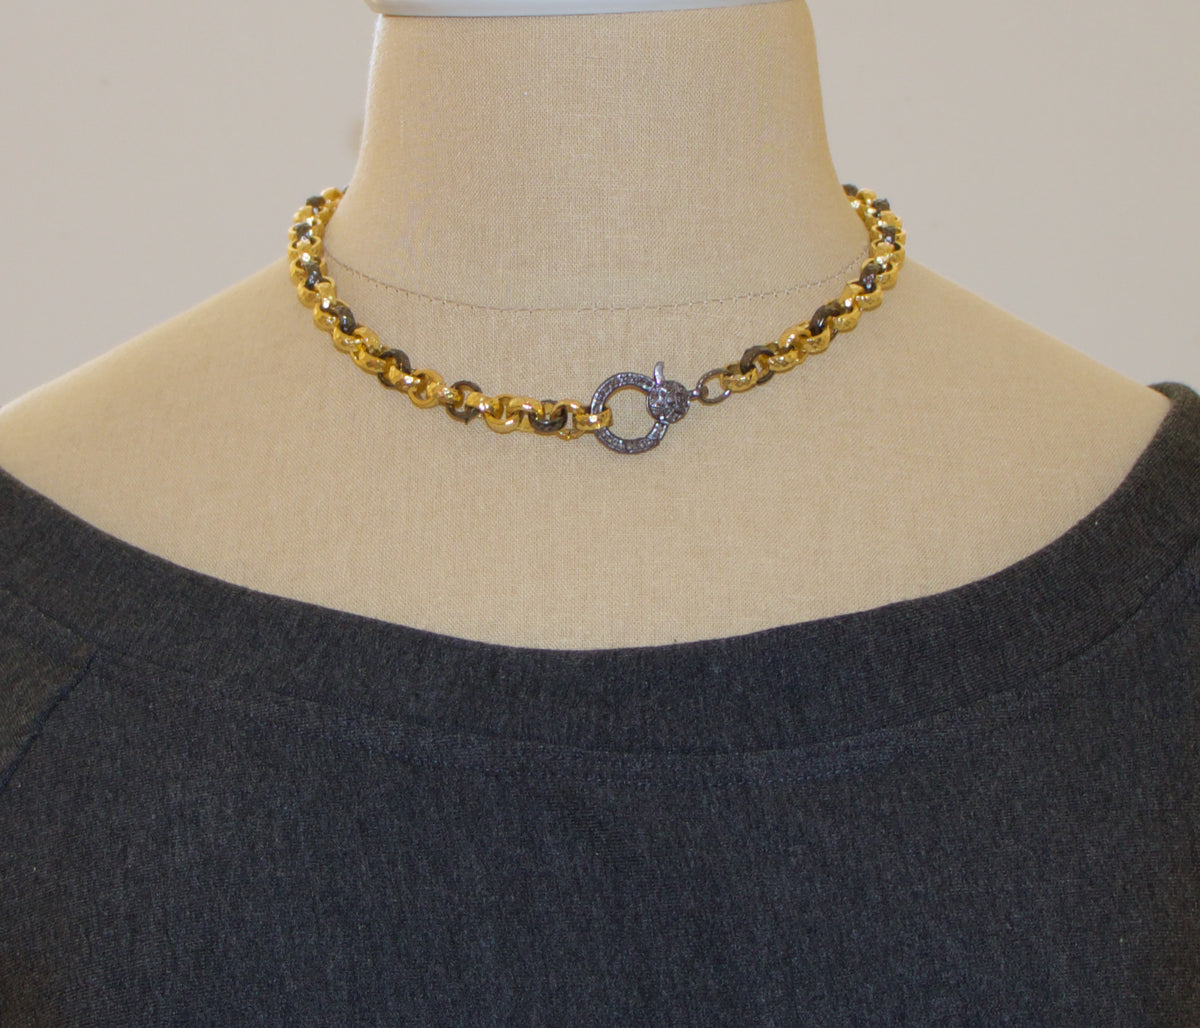 TWO TONED CHAIN NECKLACE W/ PAVE DIAMOND SILVER CLASP